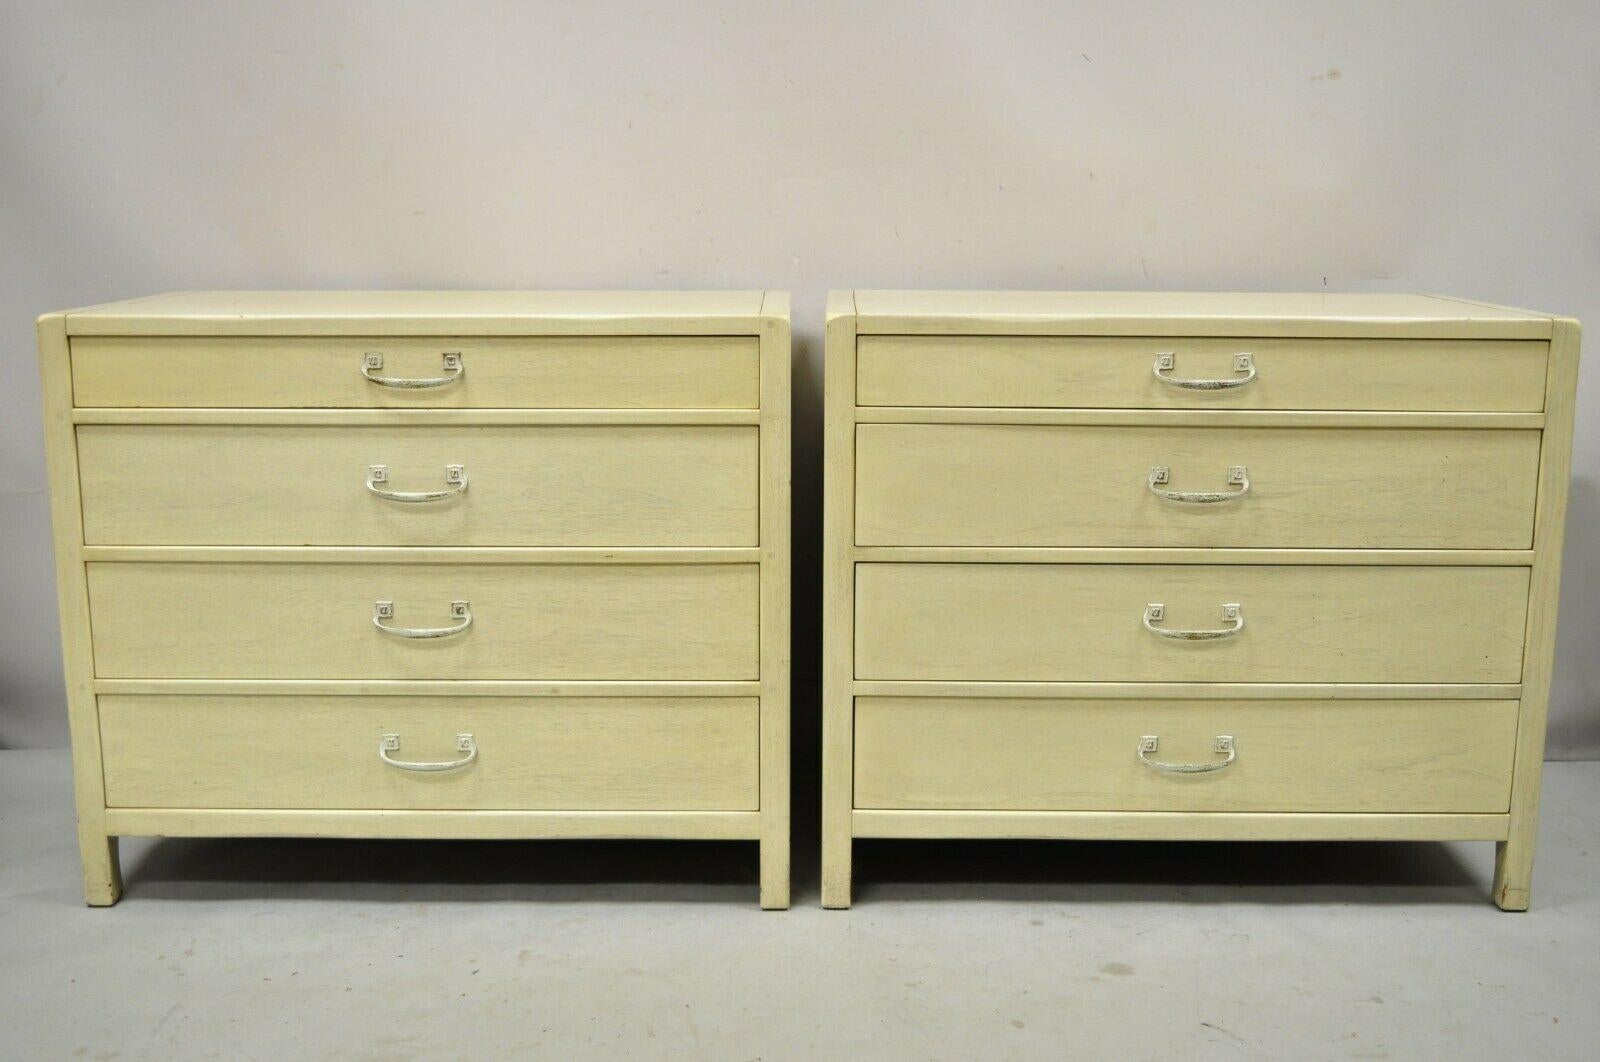 Sligh Vintage Mid Century Modern 4 Drawer Painted Cerused Bachelor Chest Dresser - Pair. Item features cerused distressed finish, 4 dovetailed drawers, solid brass hardware, very nice vintage item, clean modernist lines, quality American